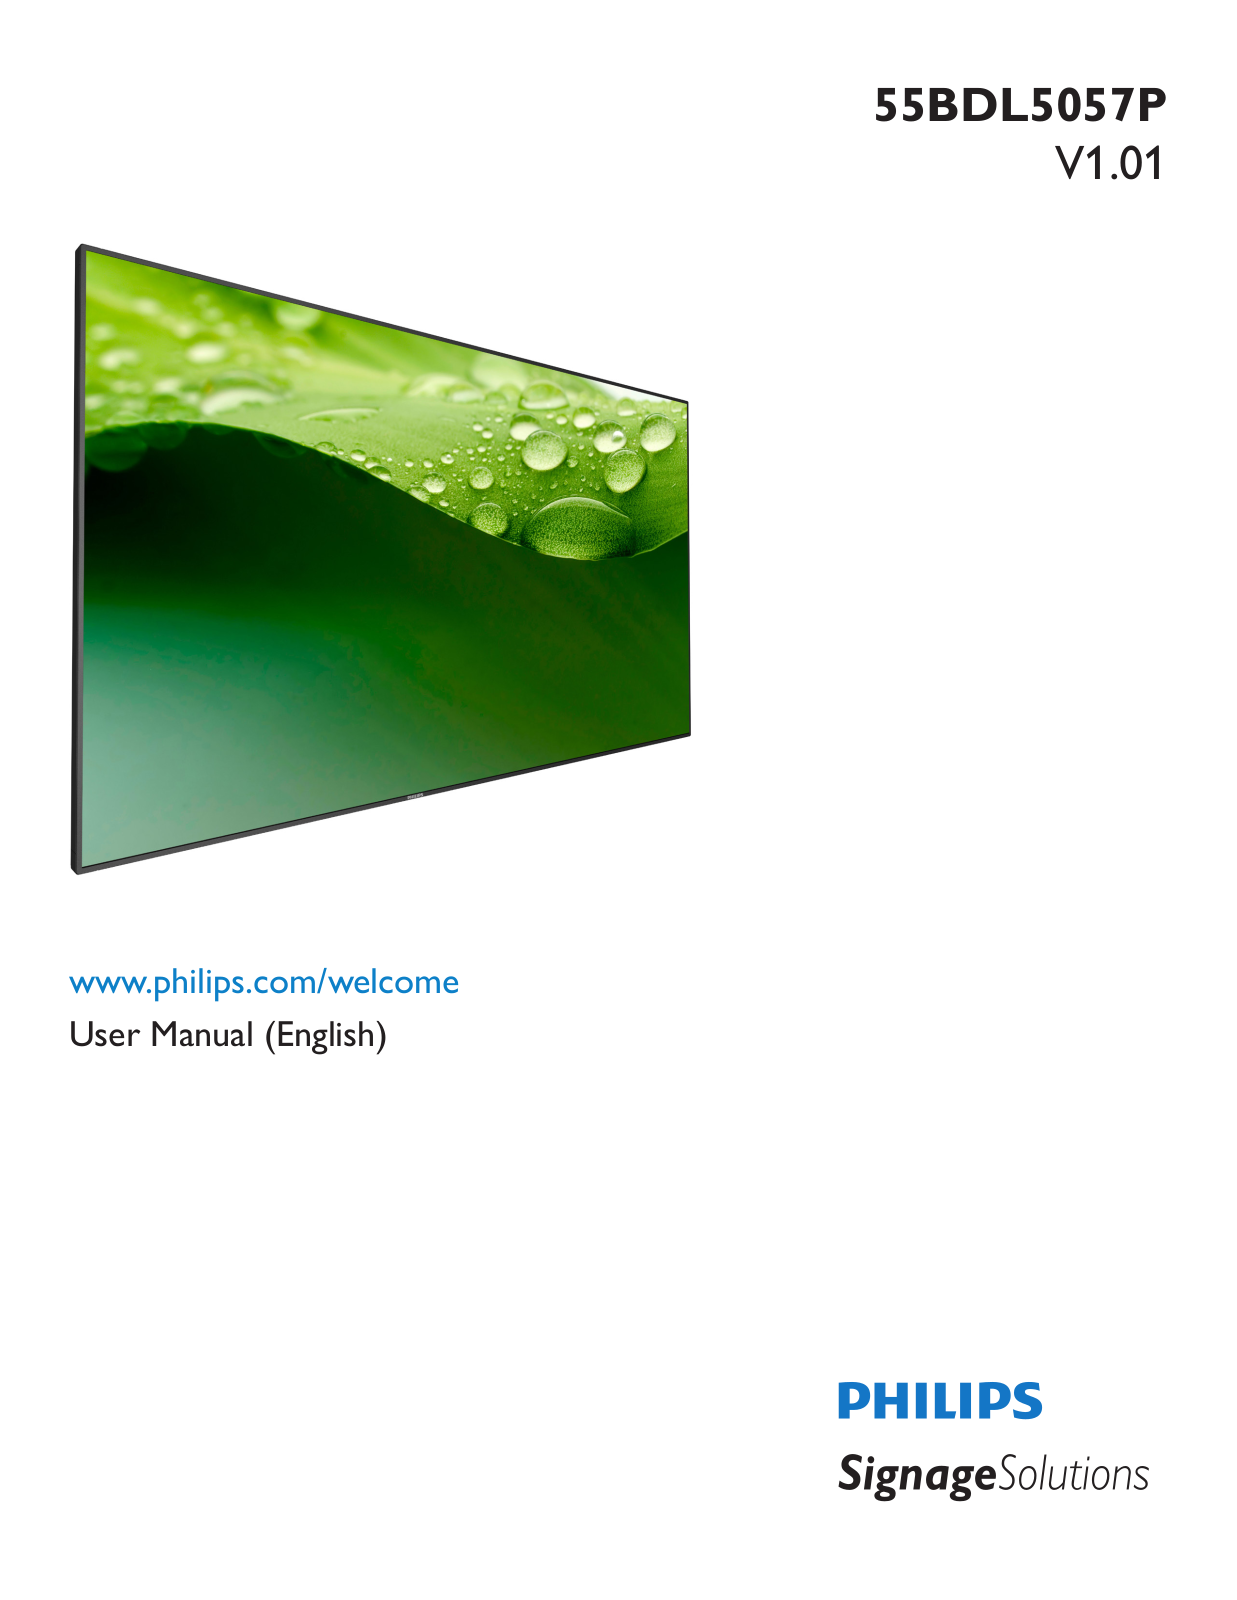 Philips 55BDL5057P User Guide